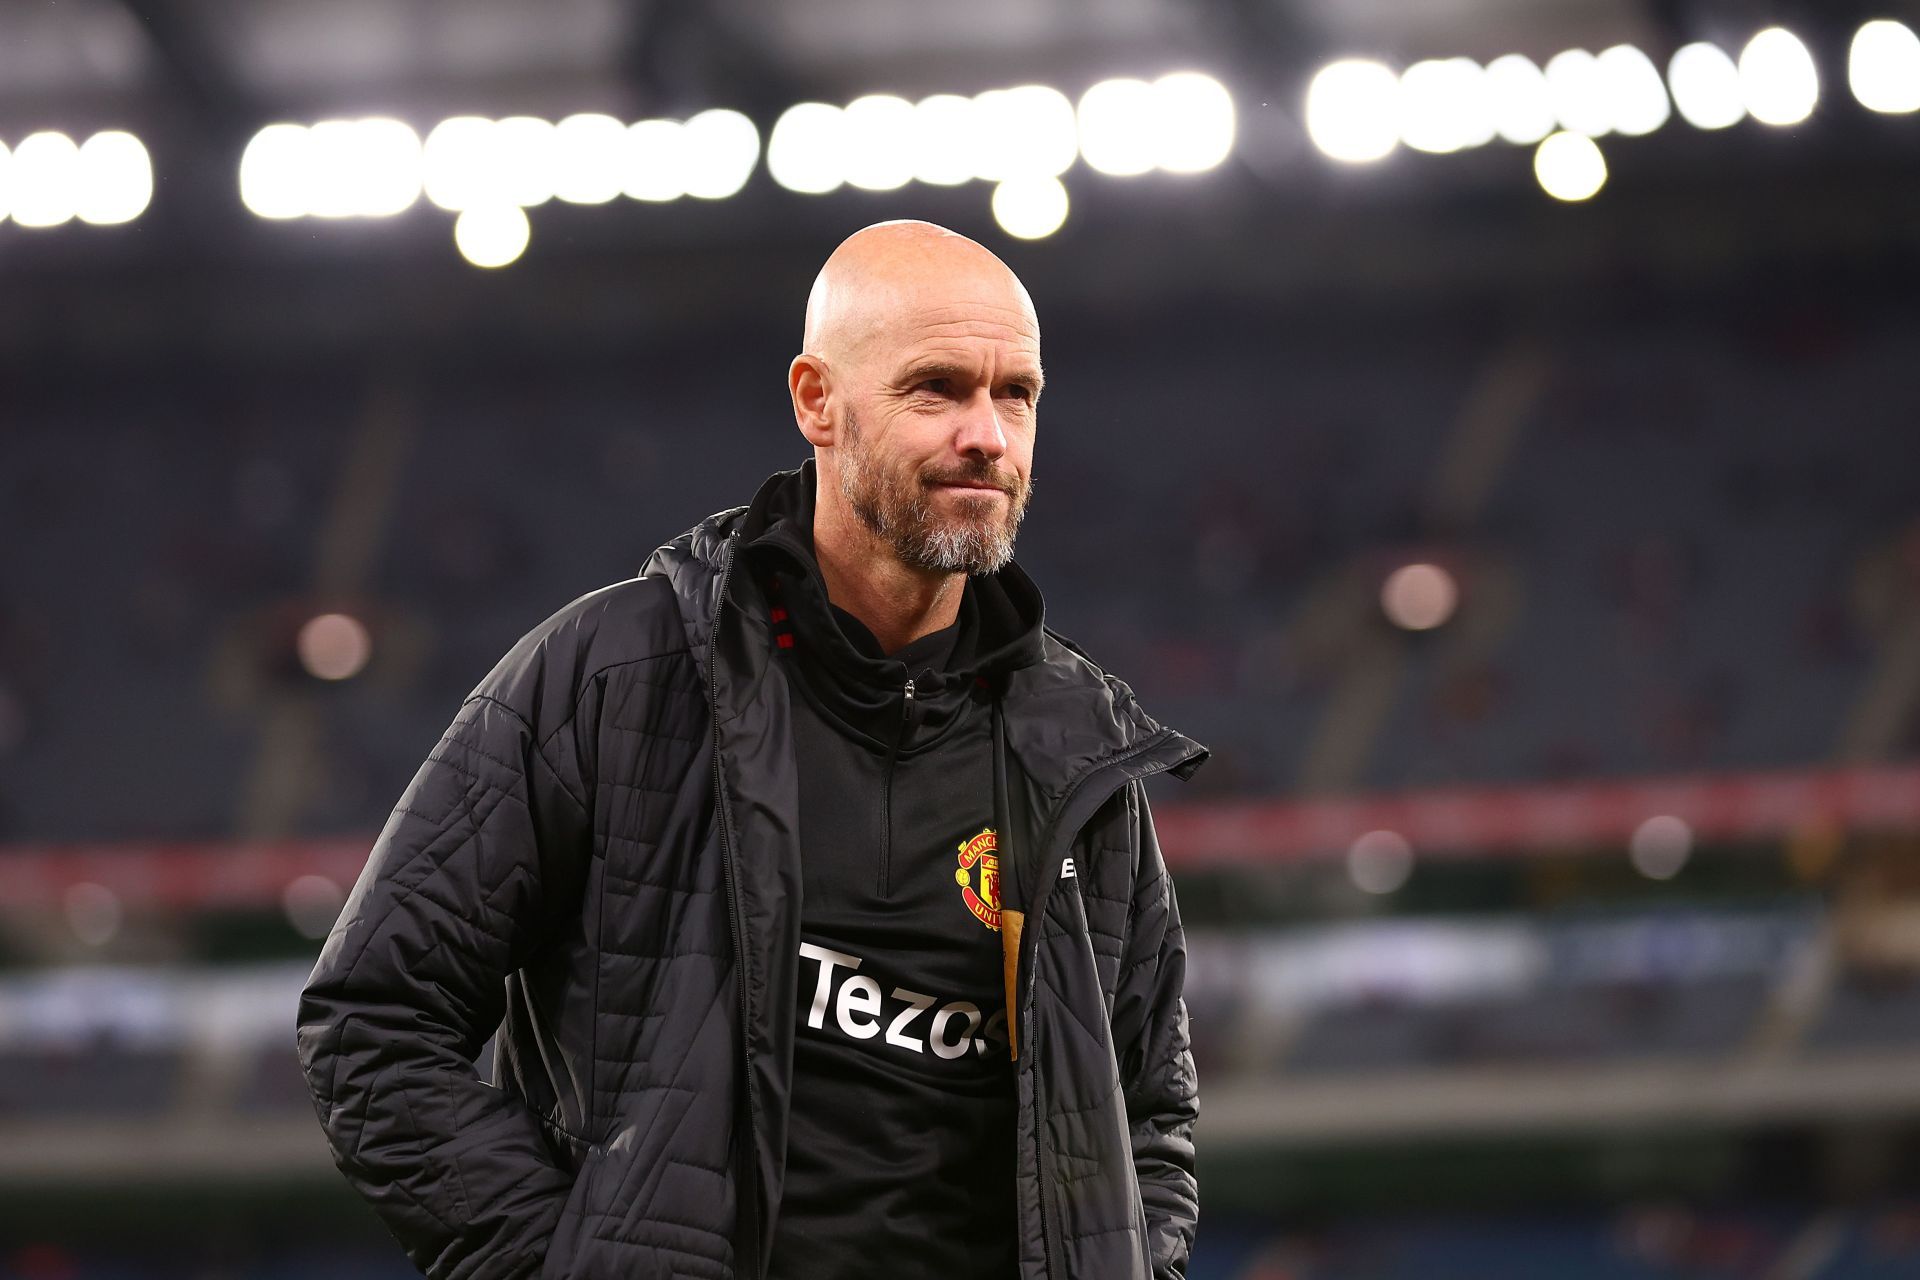 Erik ten Hag searches his first win with the Red Devils